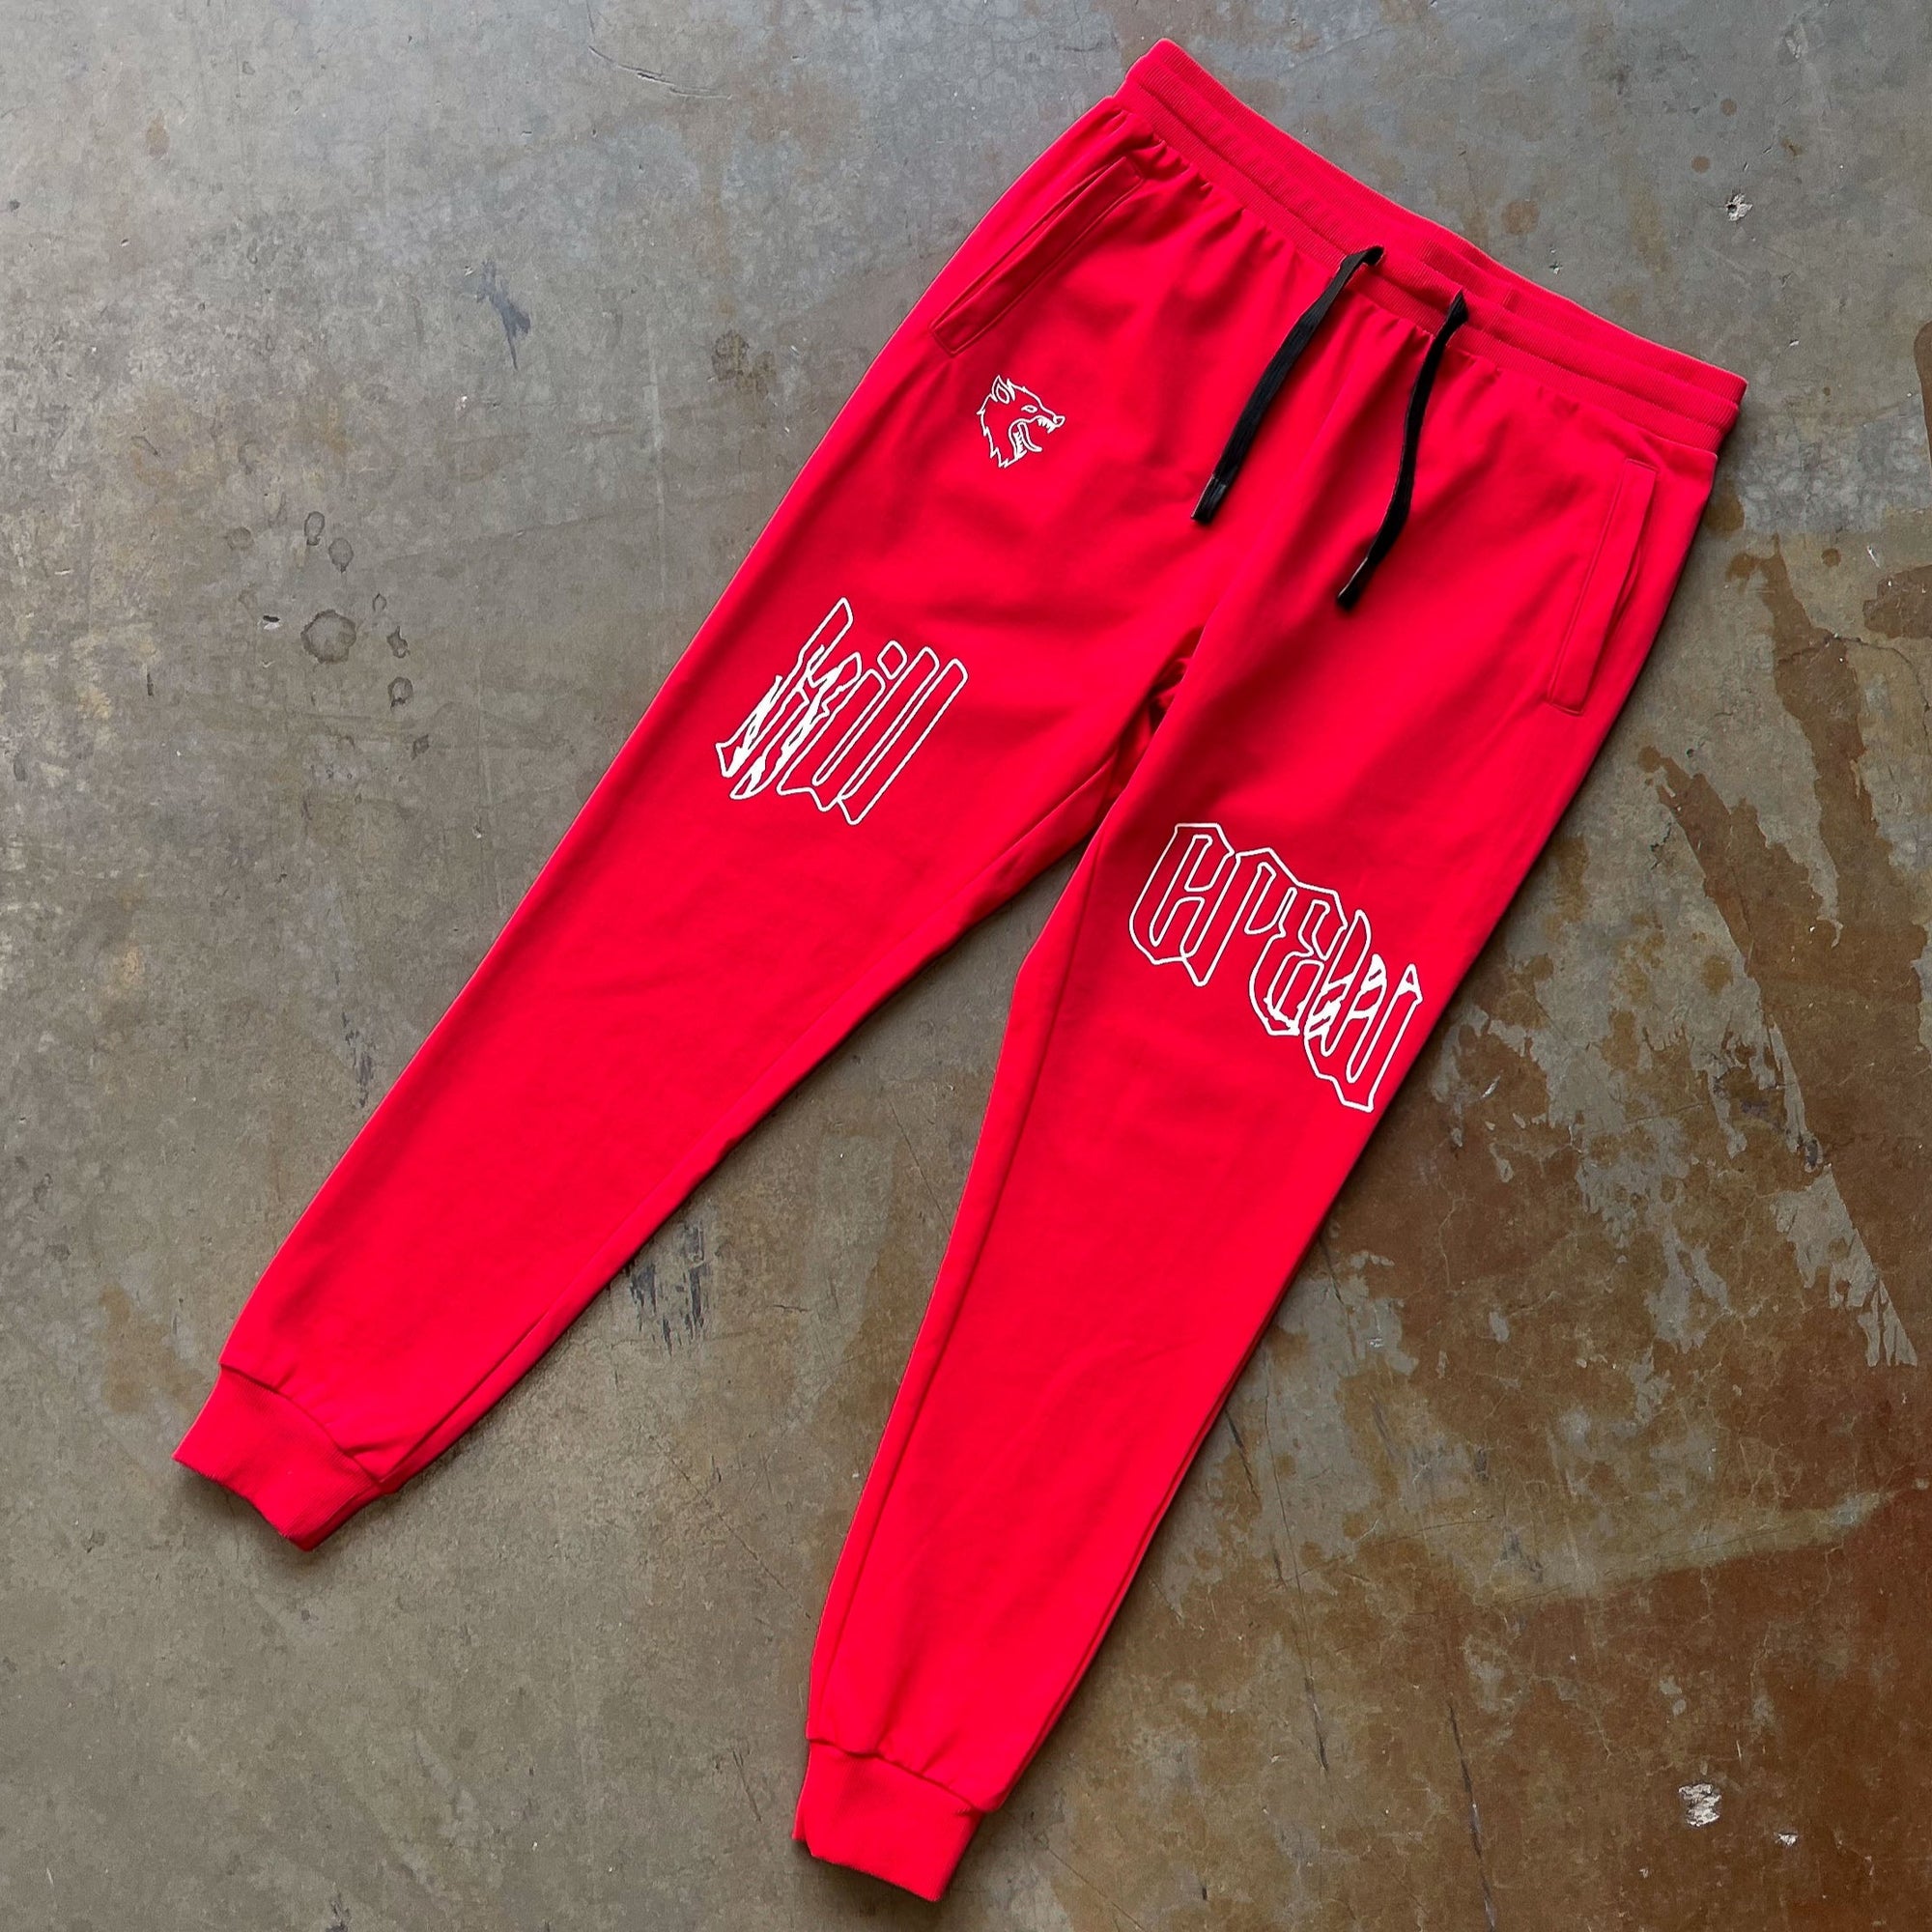 SCAR JOGGERS - RED / WHITE